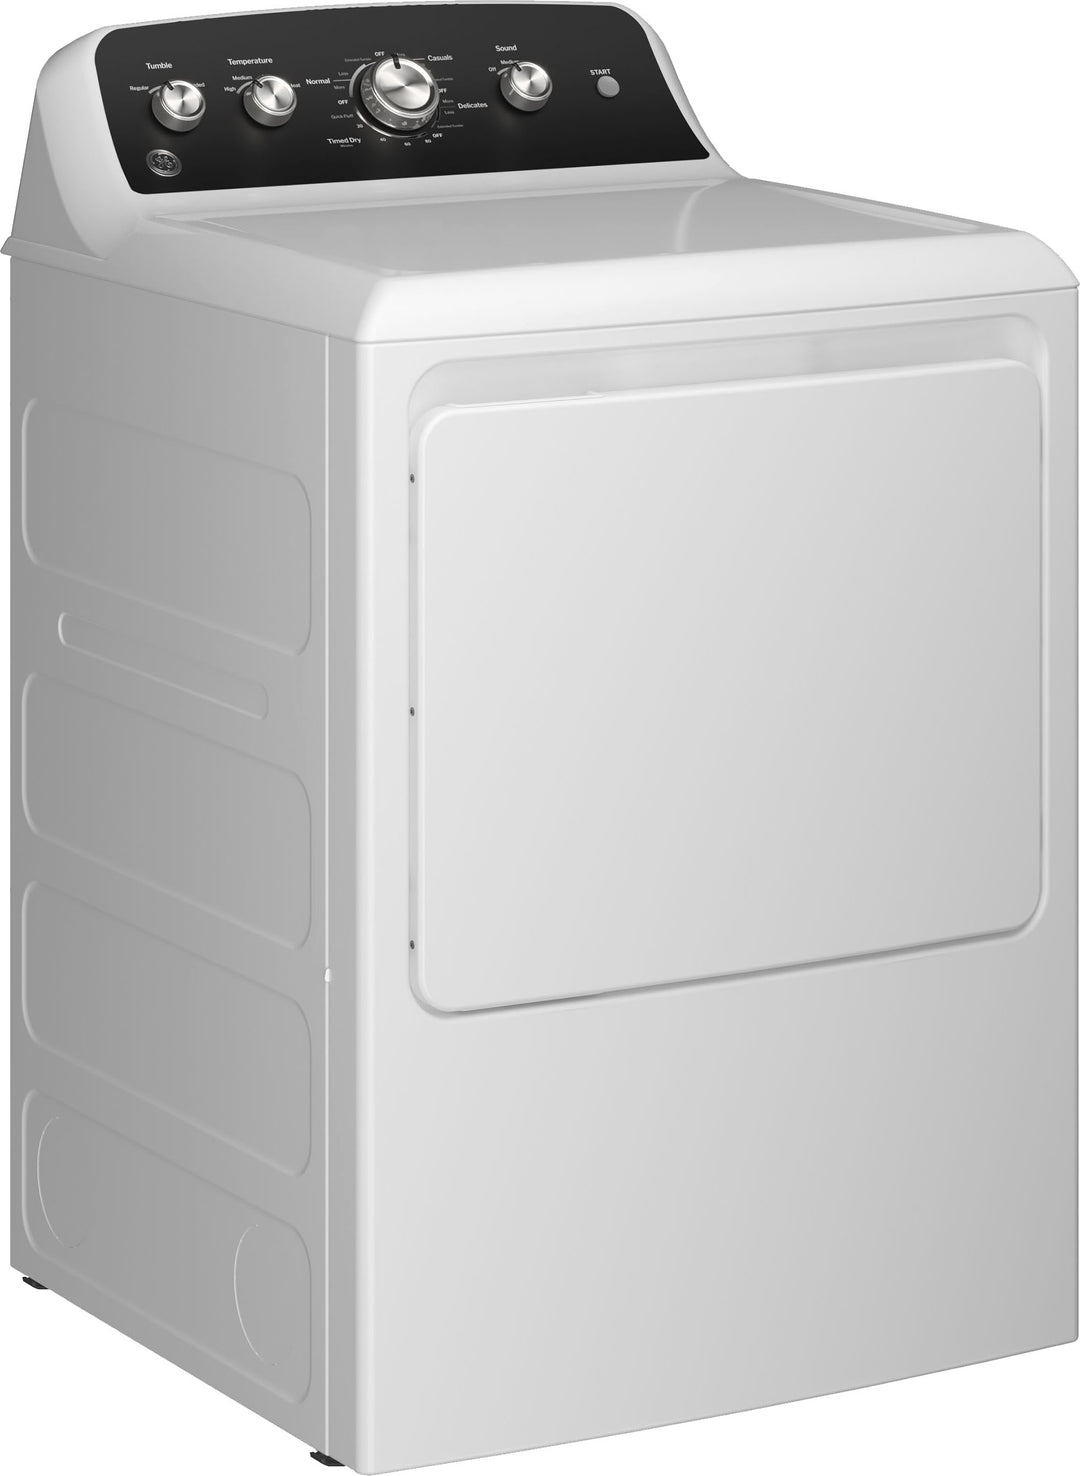 GE - 7.2 Cu. Ft. Electric Dryer with Long Venting up to 120 Ft. - White with Black_10